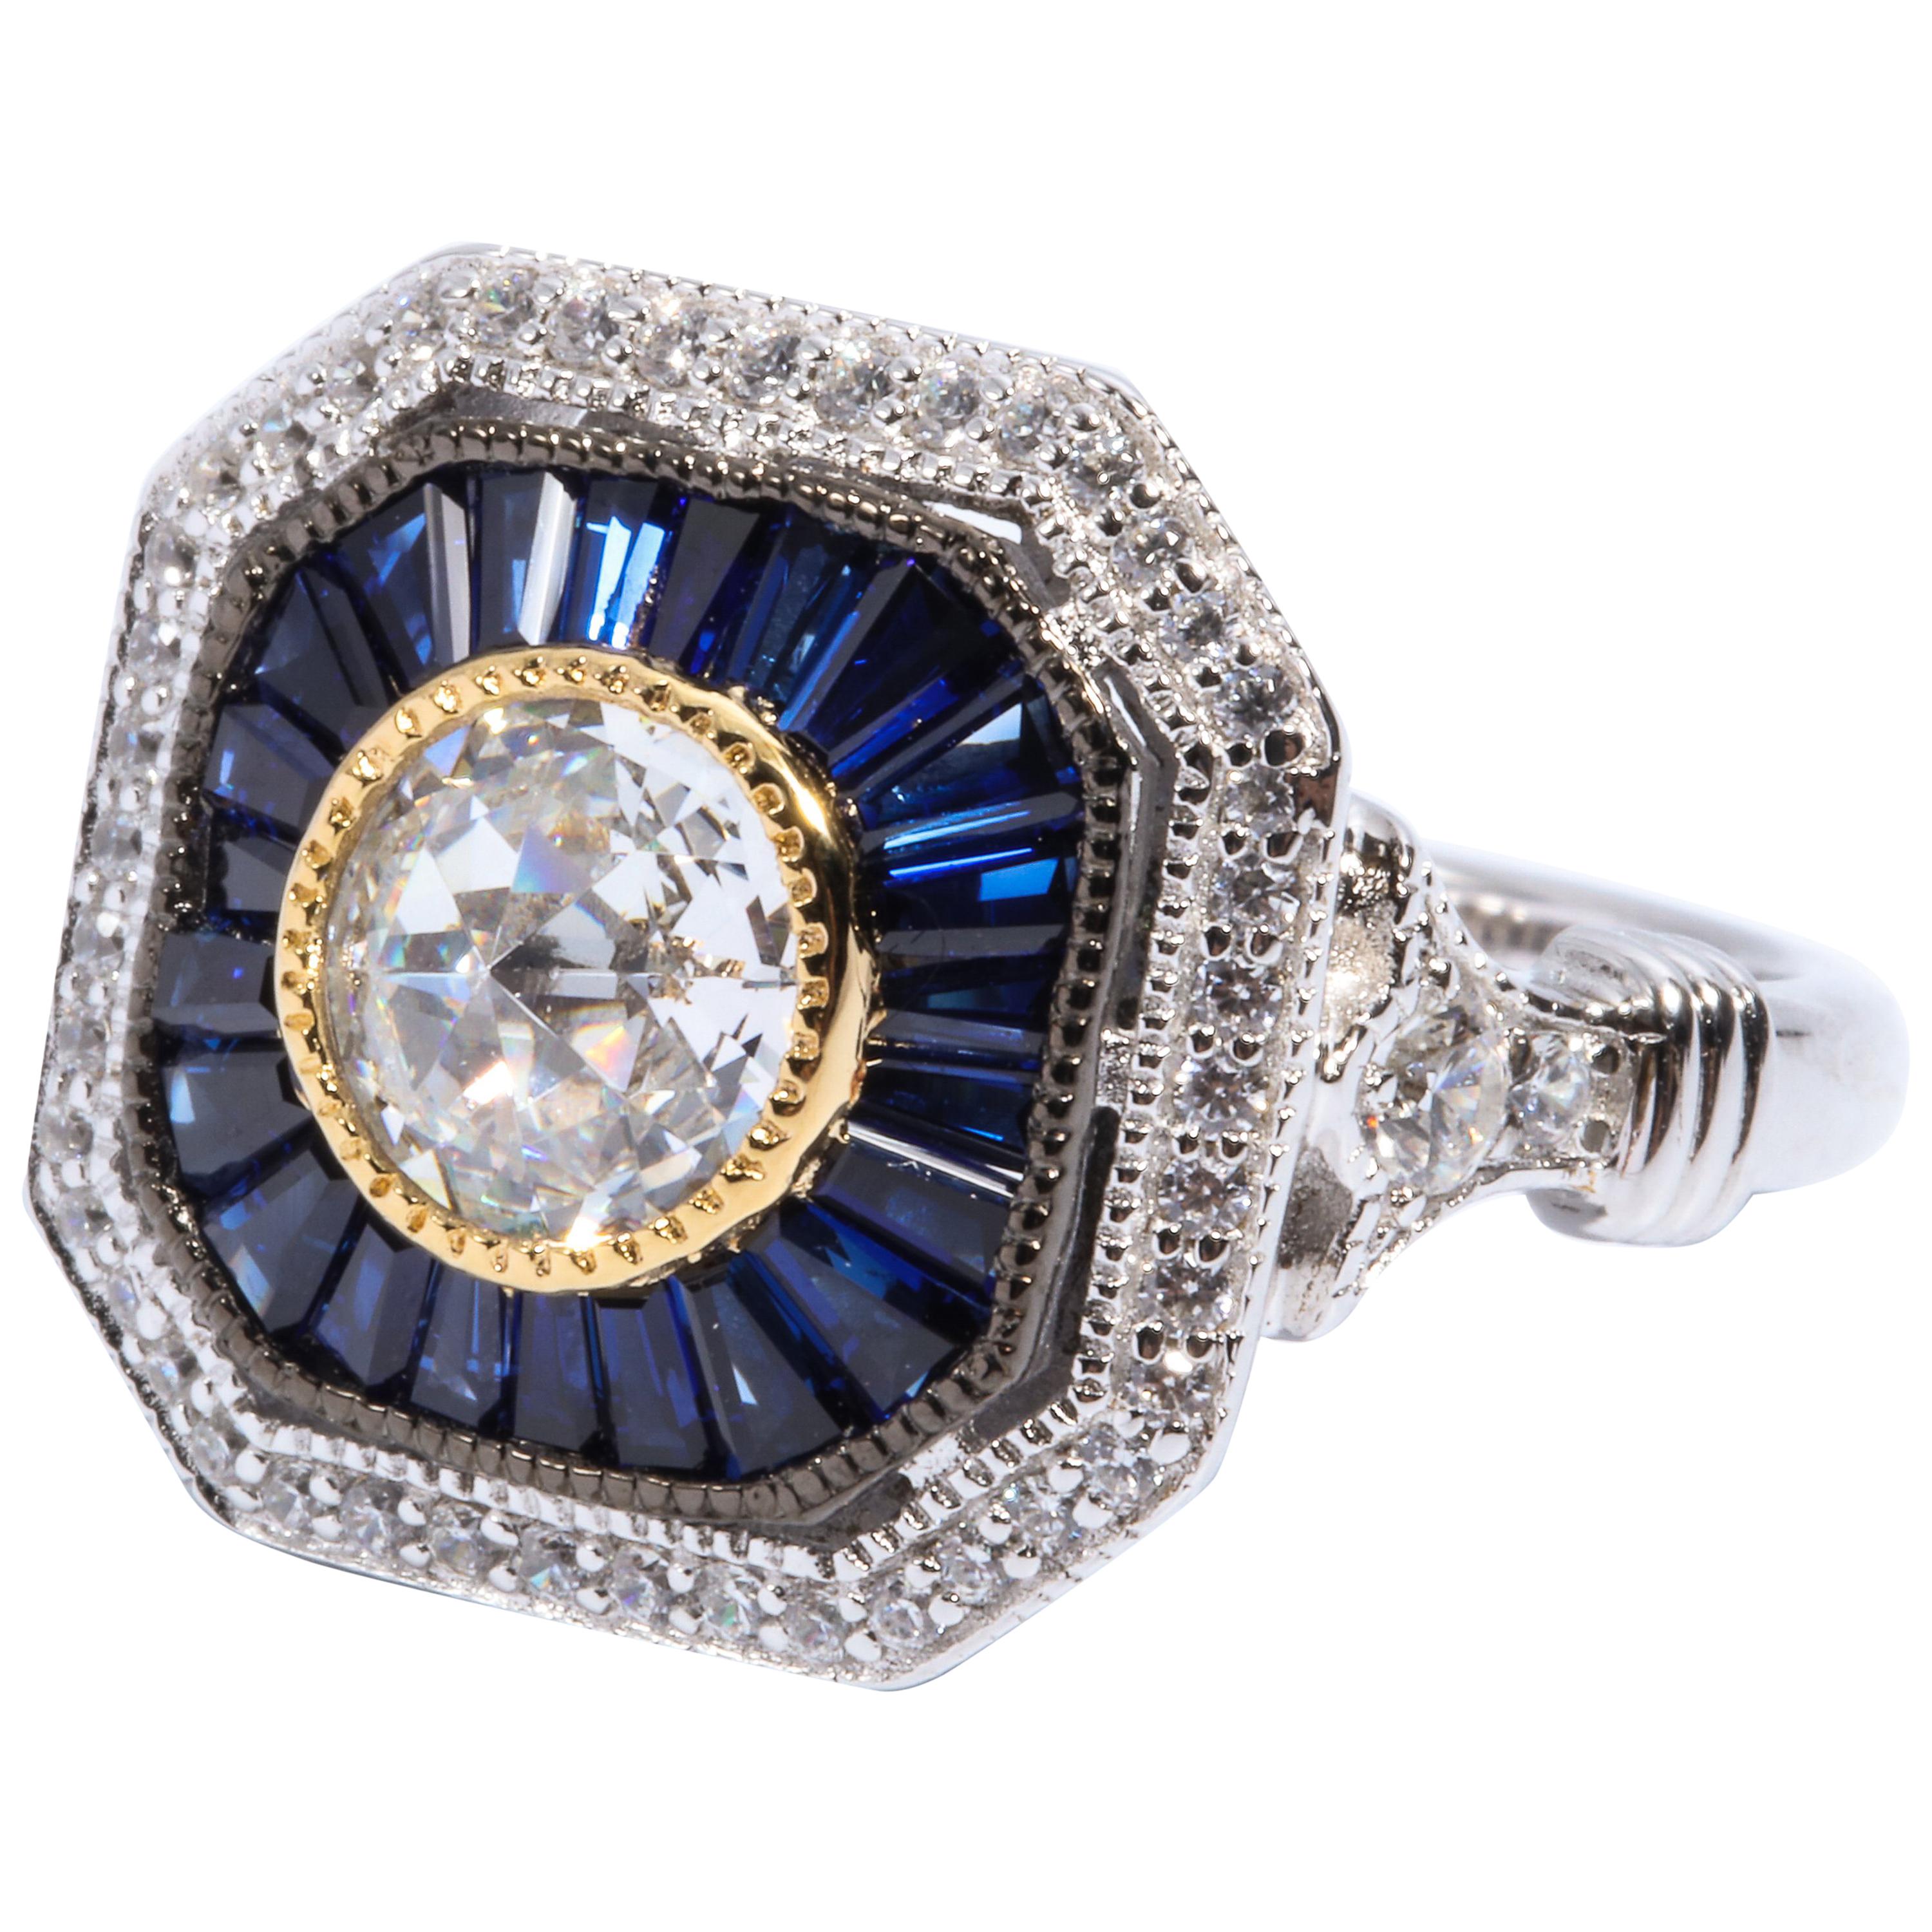 Details about   Lovely Art Deco Style Ring w/ Sapphires Diamonds Sterling Silver 